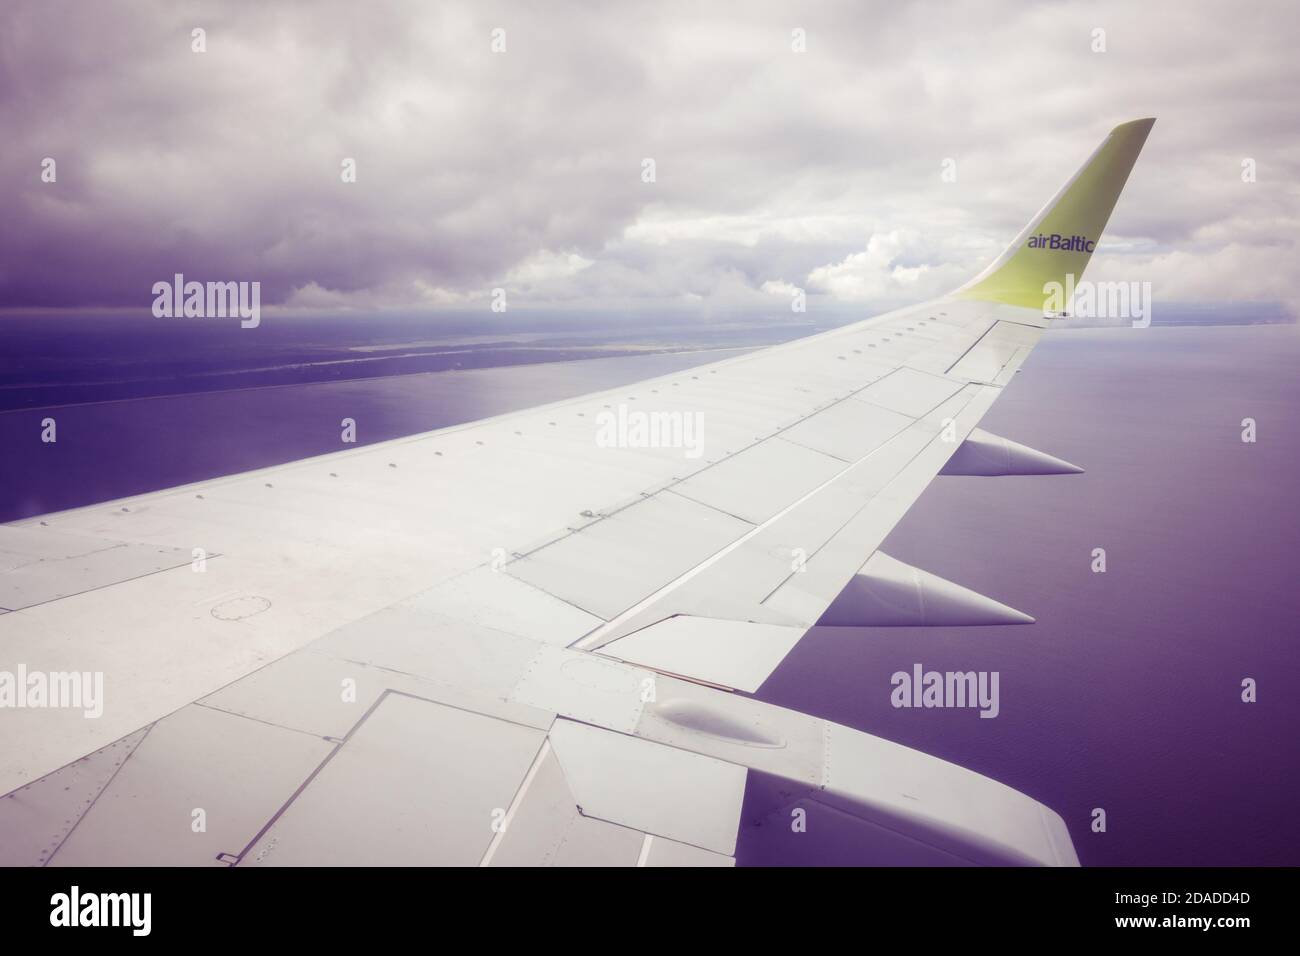 Berlin, Germany - October 01, 2019: Airplane airBaltic in flight - view of an airplane wing in the clouds Stock Photo